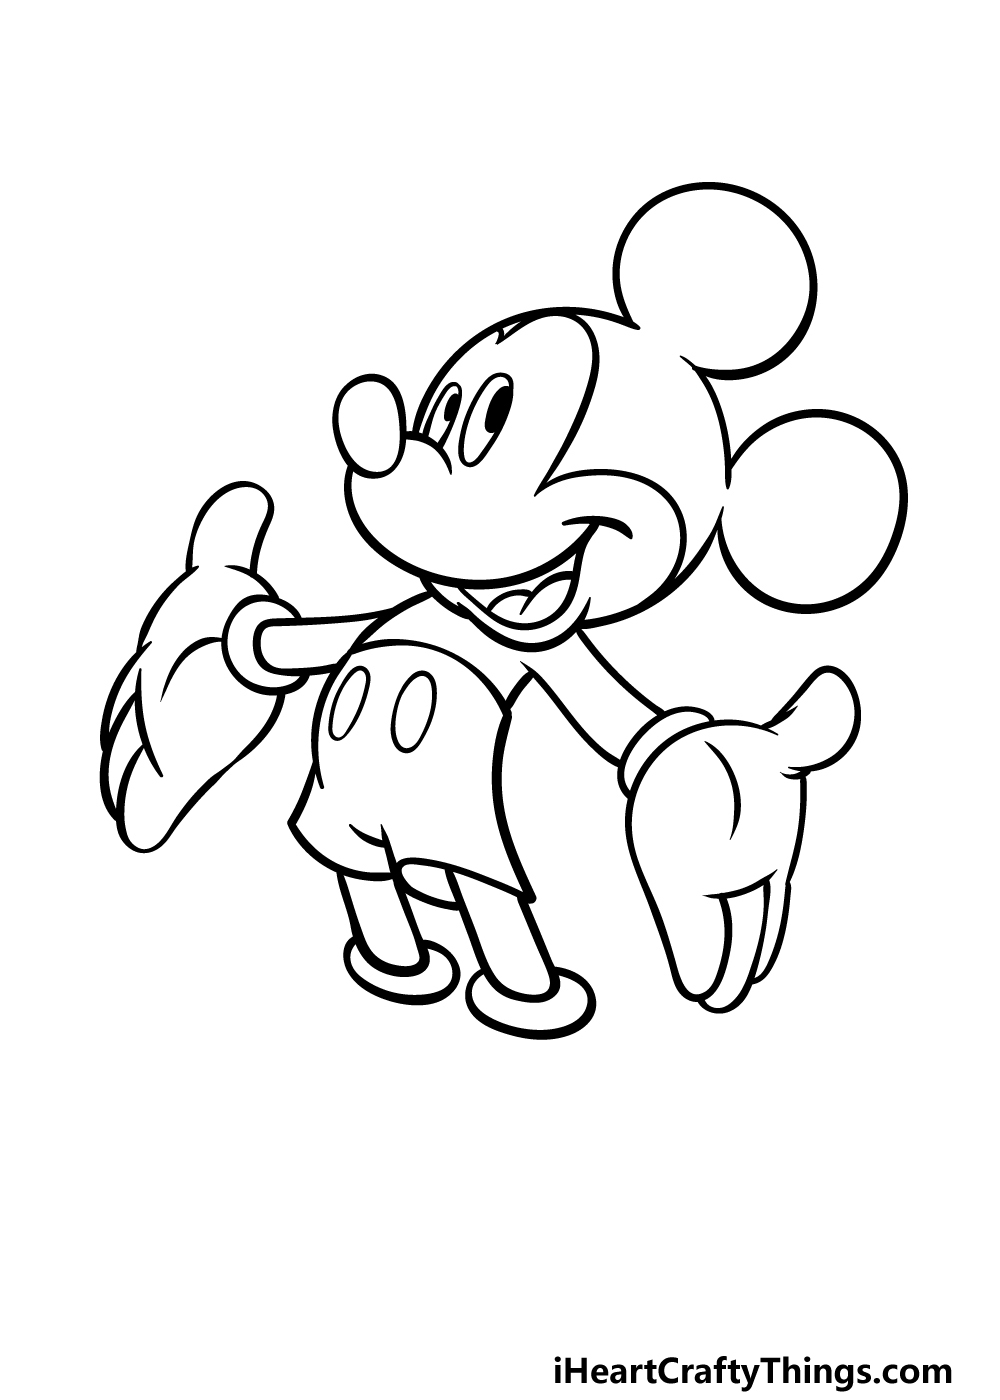 Mickey Drawing - How To Draw Mickey Step By Step